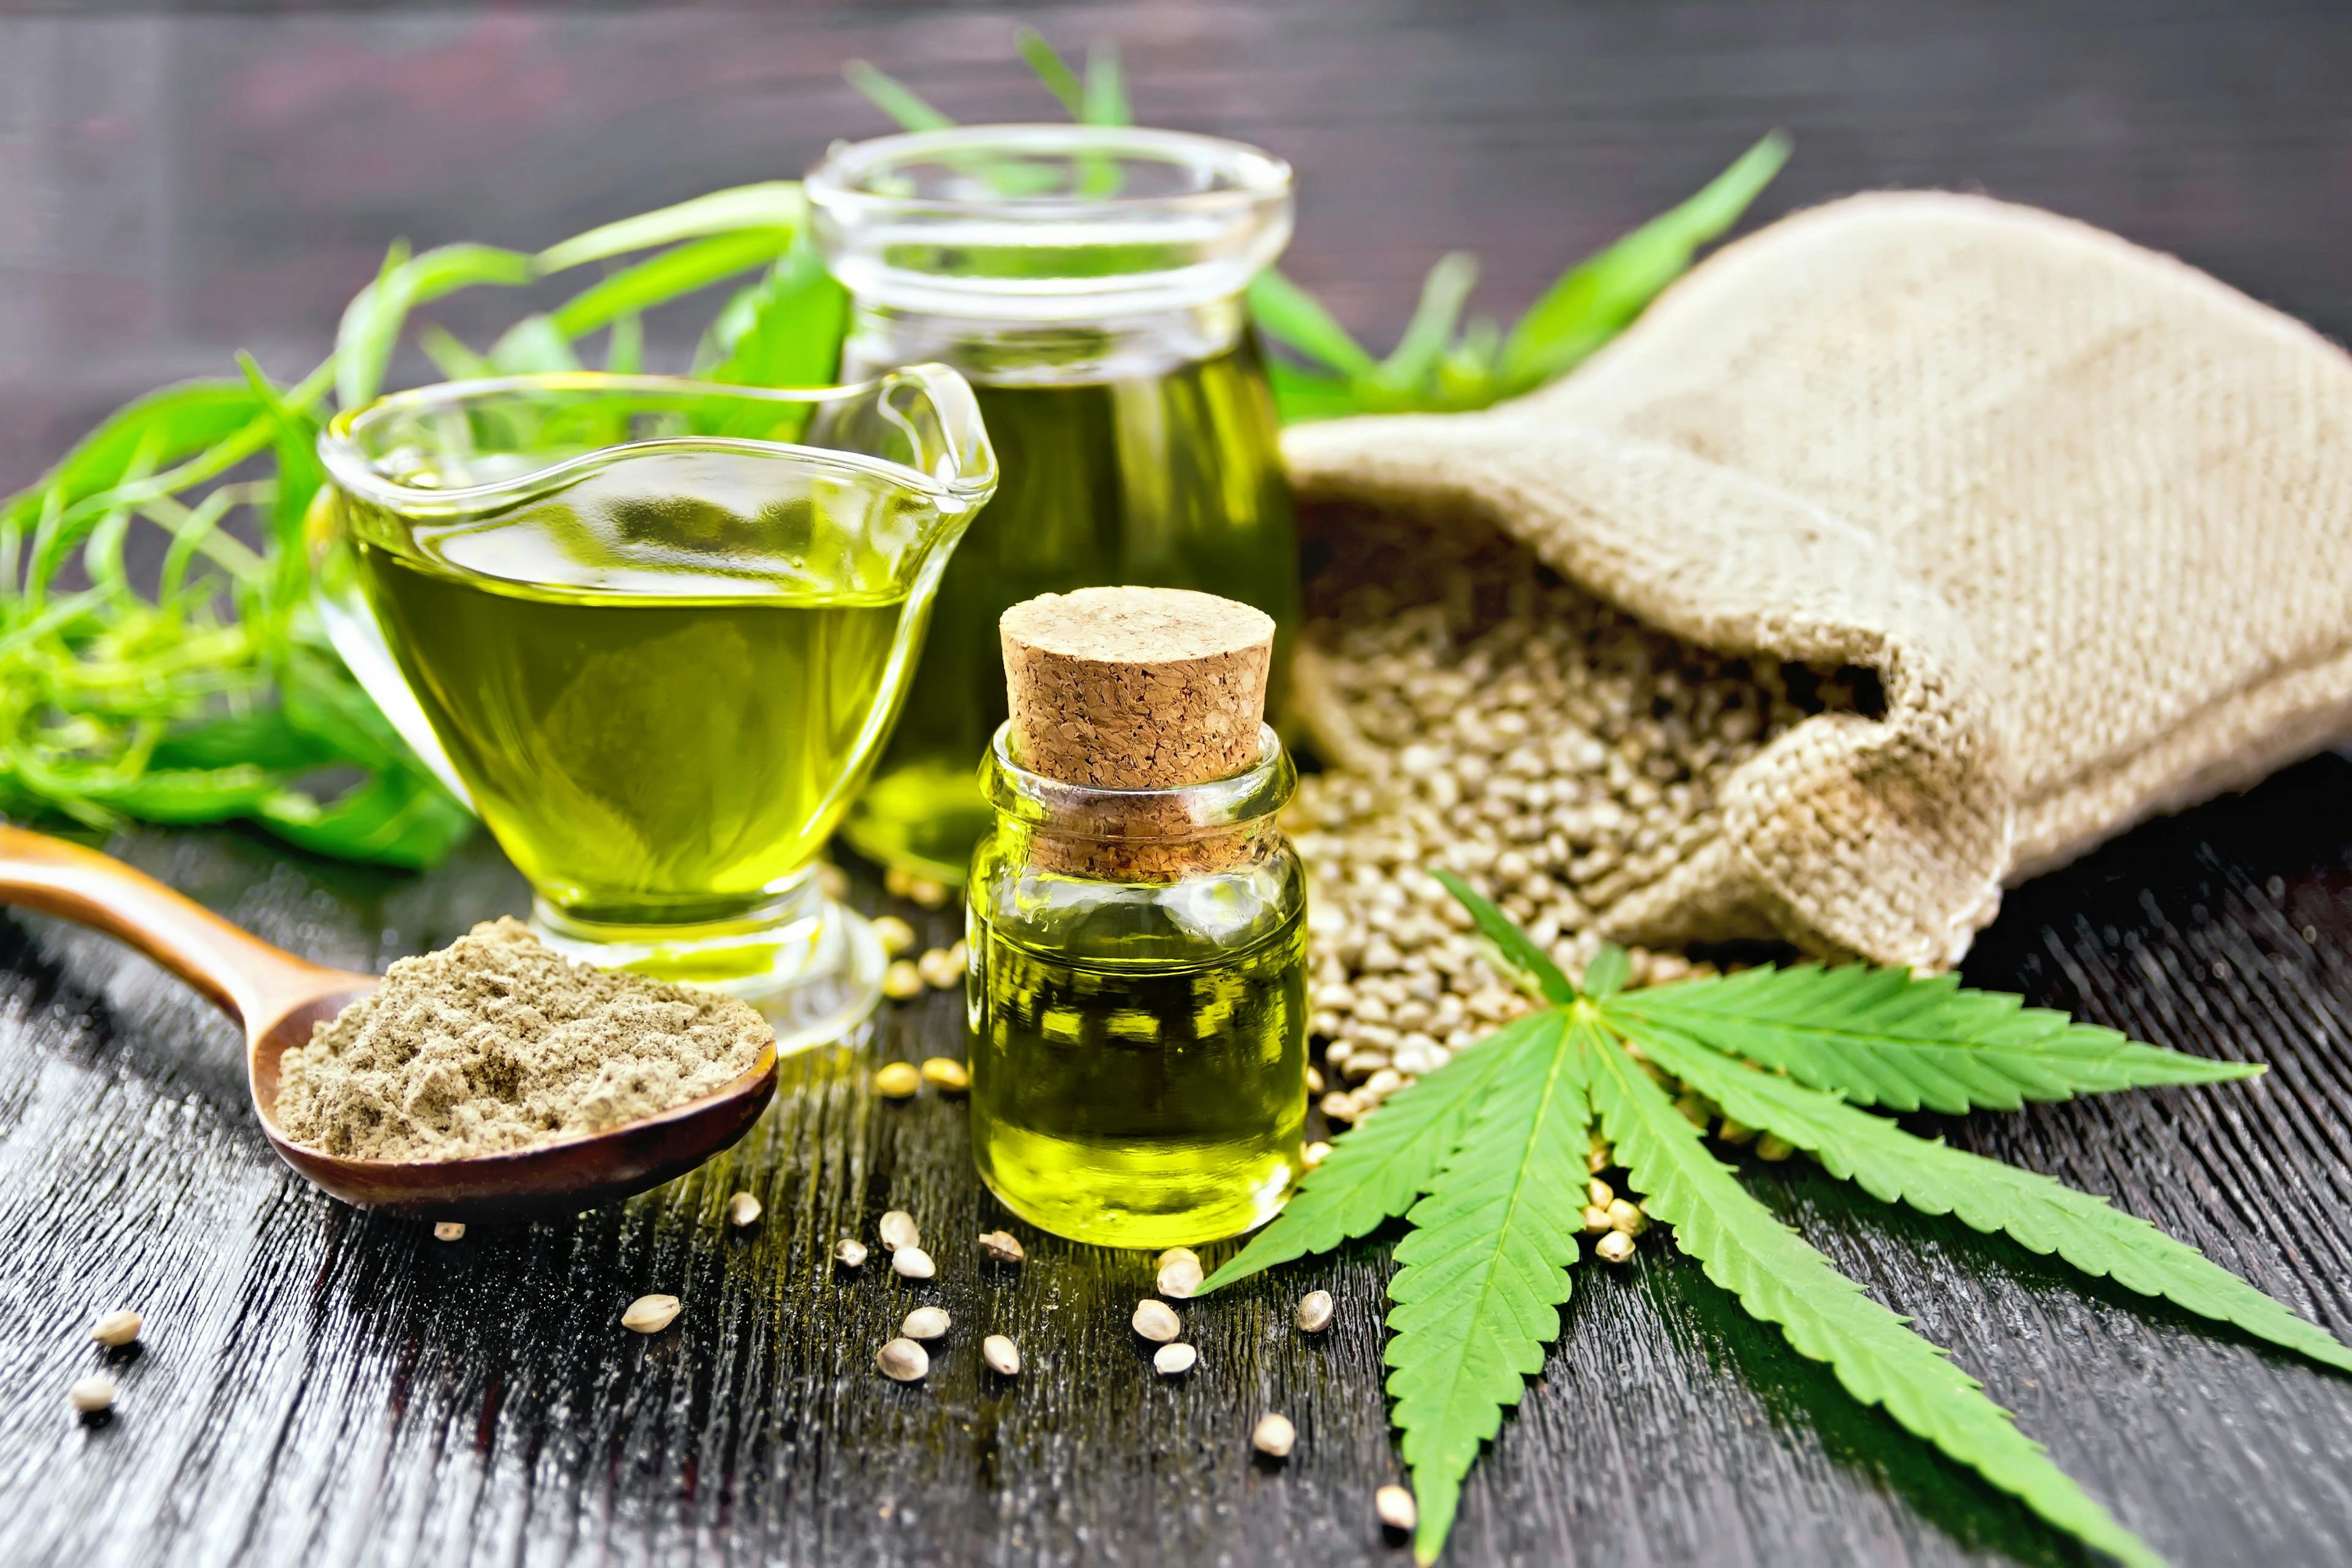 Oil hemp in two jars and sauceboat on wooden board | Image Credit: © kostrez - stock.adobe.com